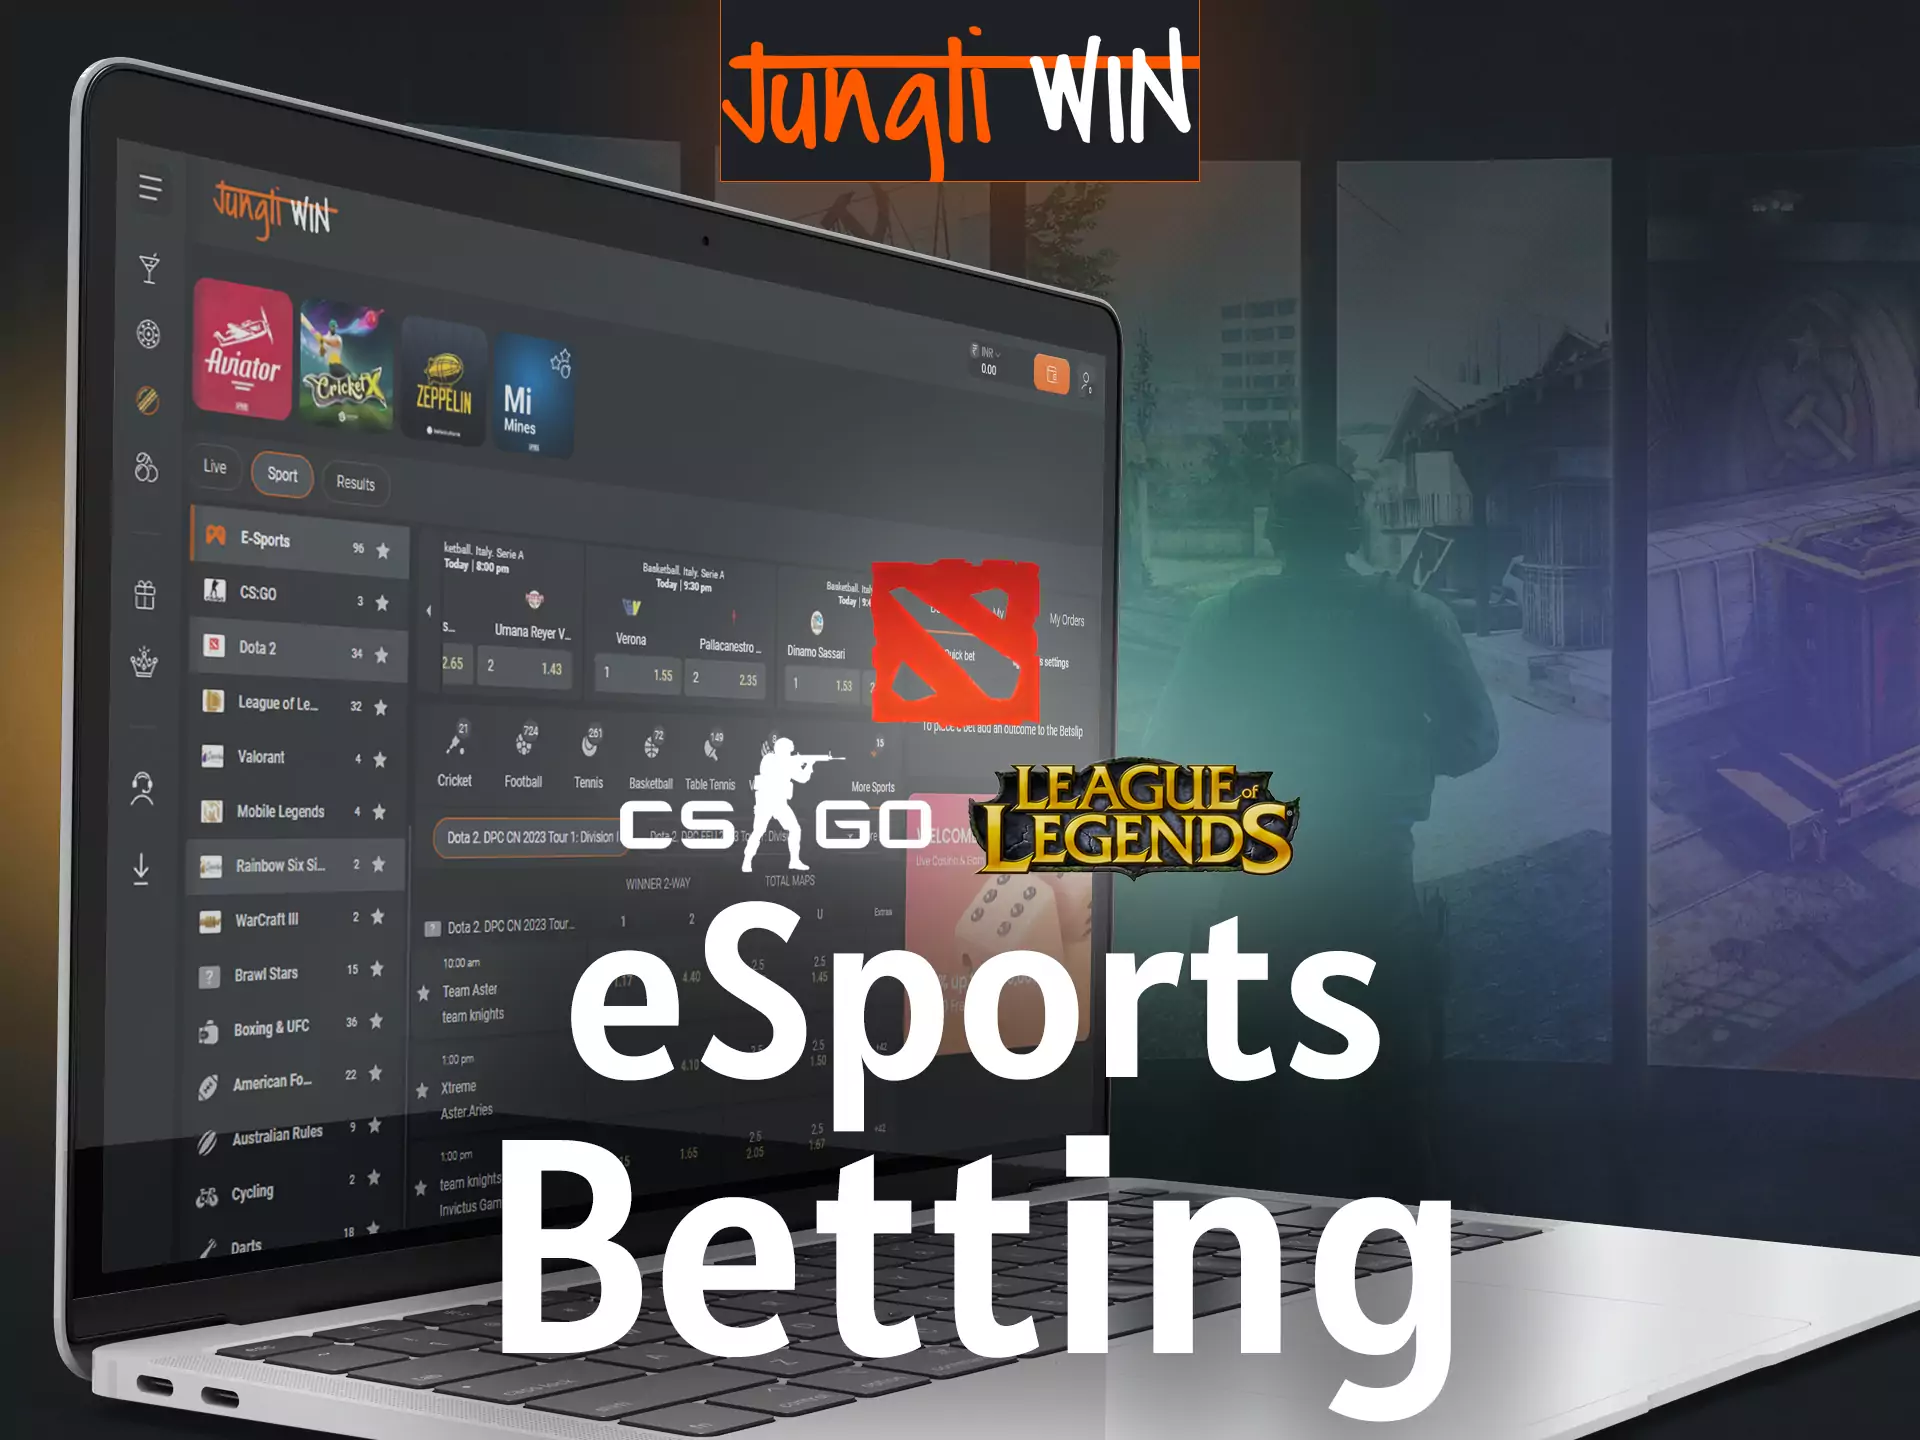 With Jungliwin, place bets on esports.